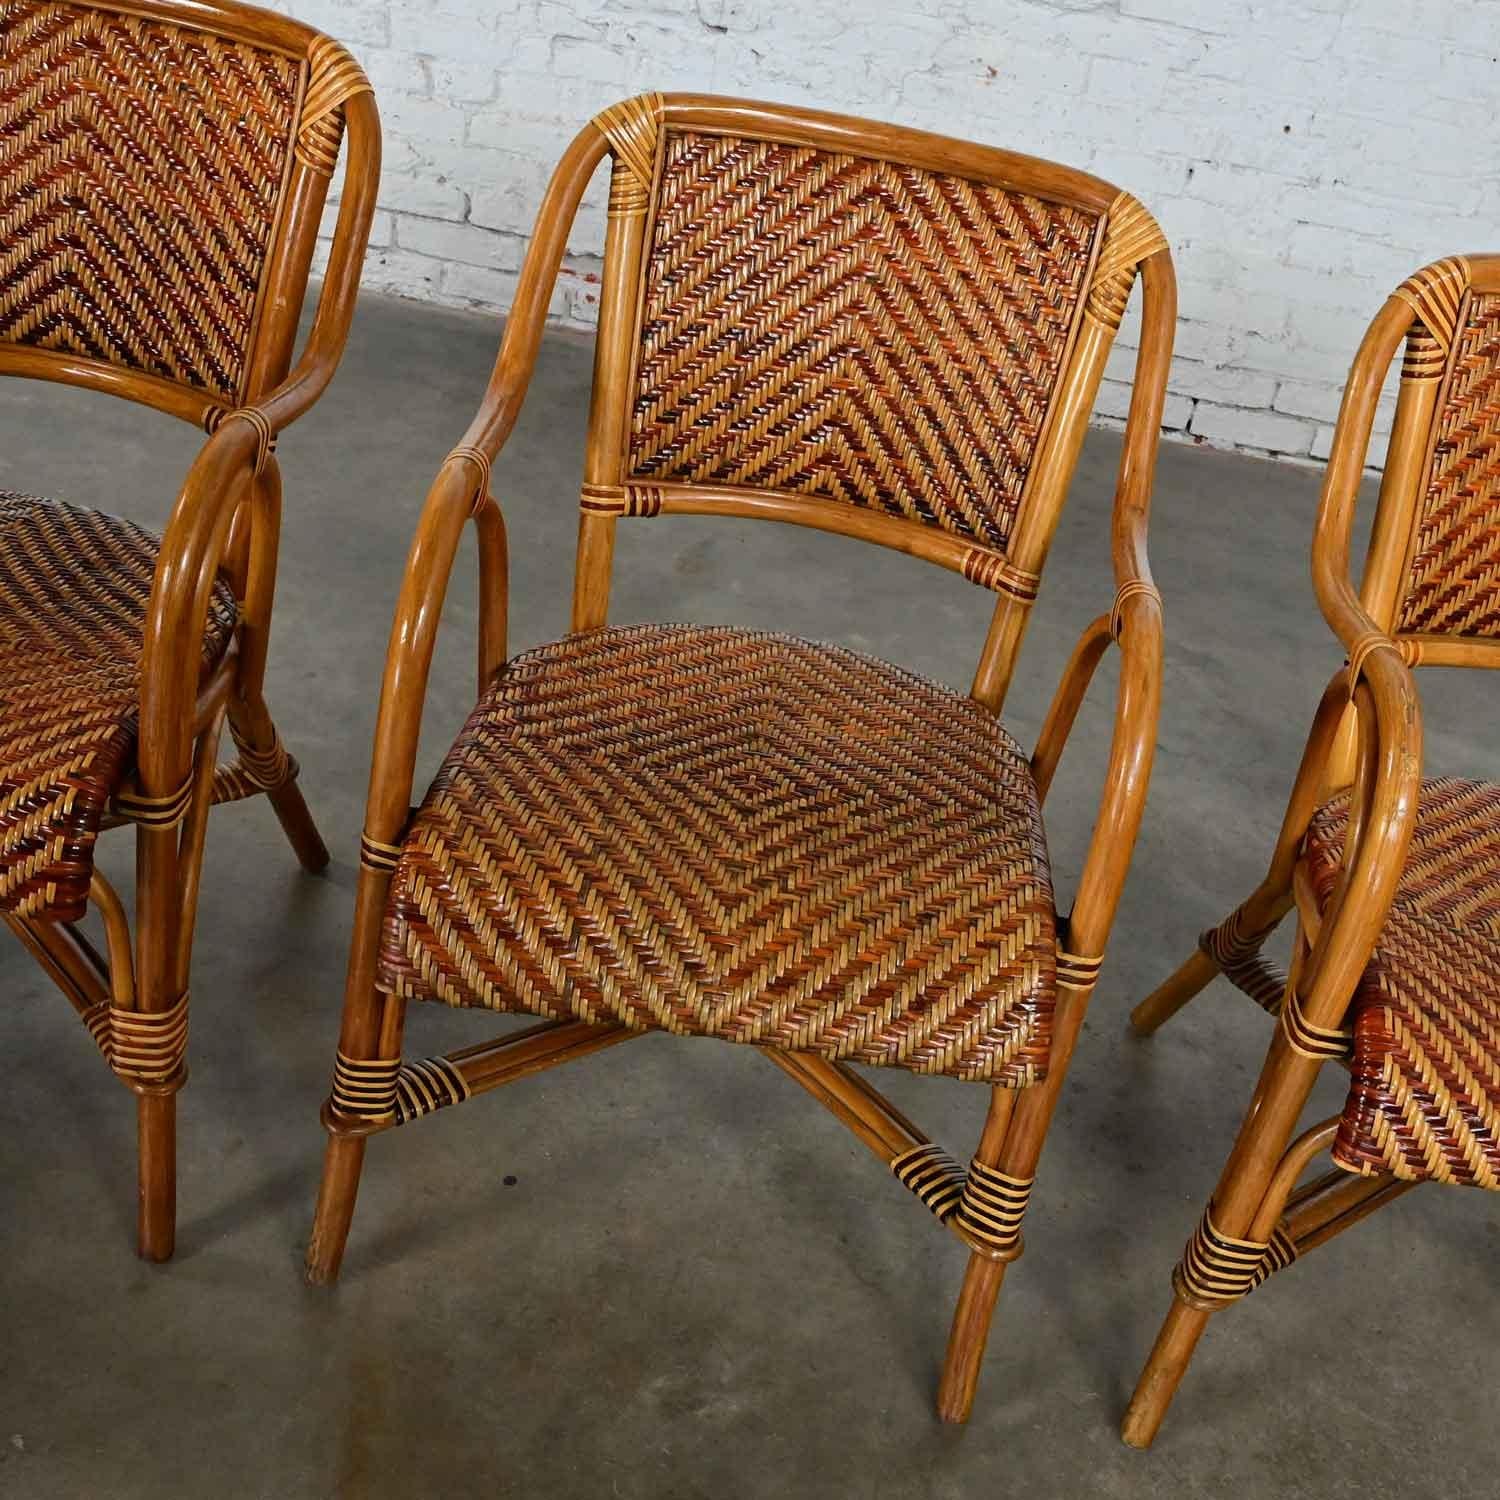 Boho Chic 2 Toned Wicker Rattan Café Bistro or Conservatory Armchairs Set of 4 6